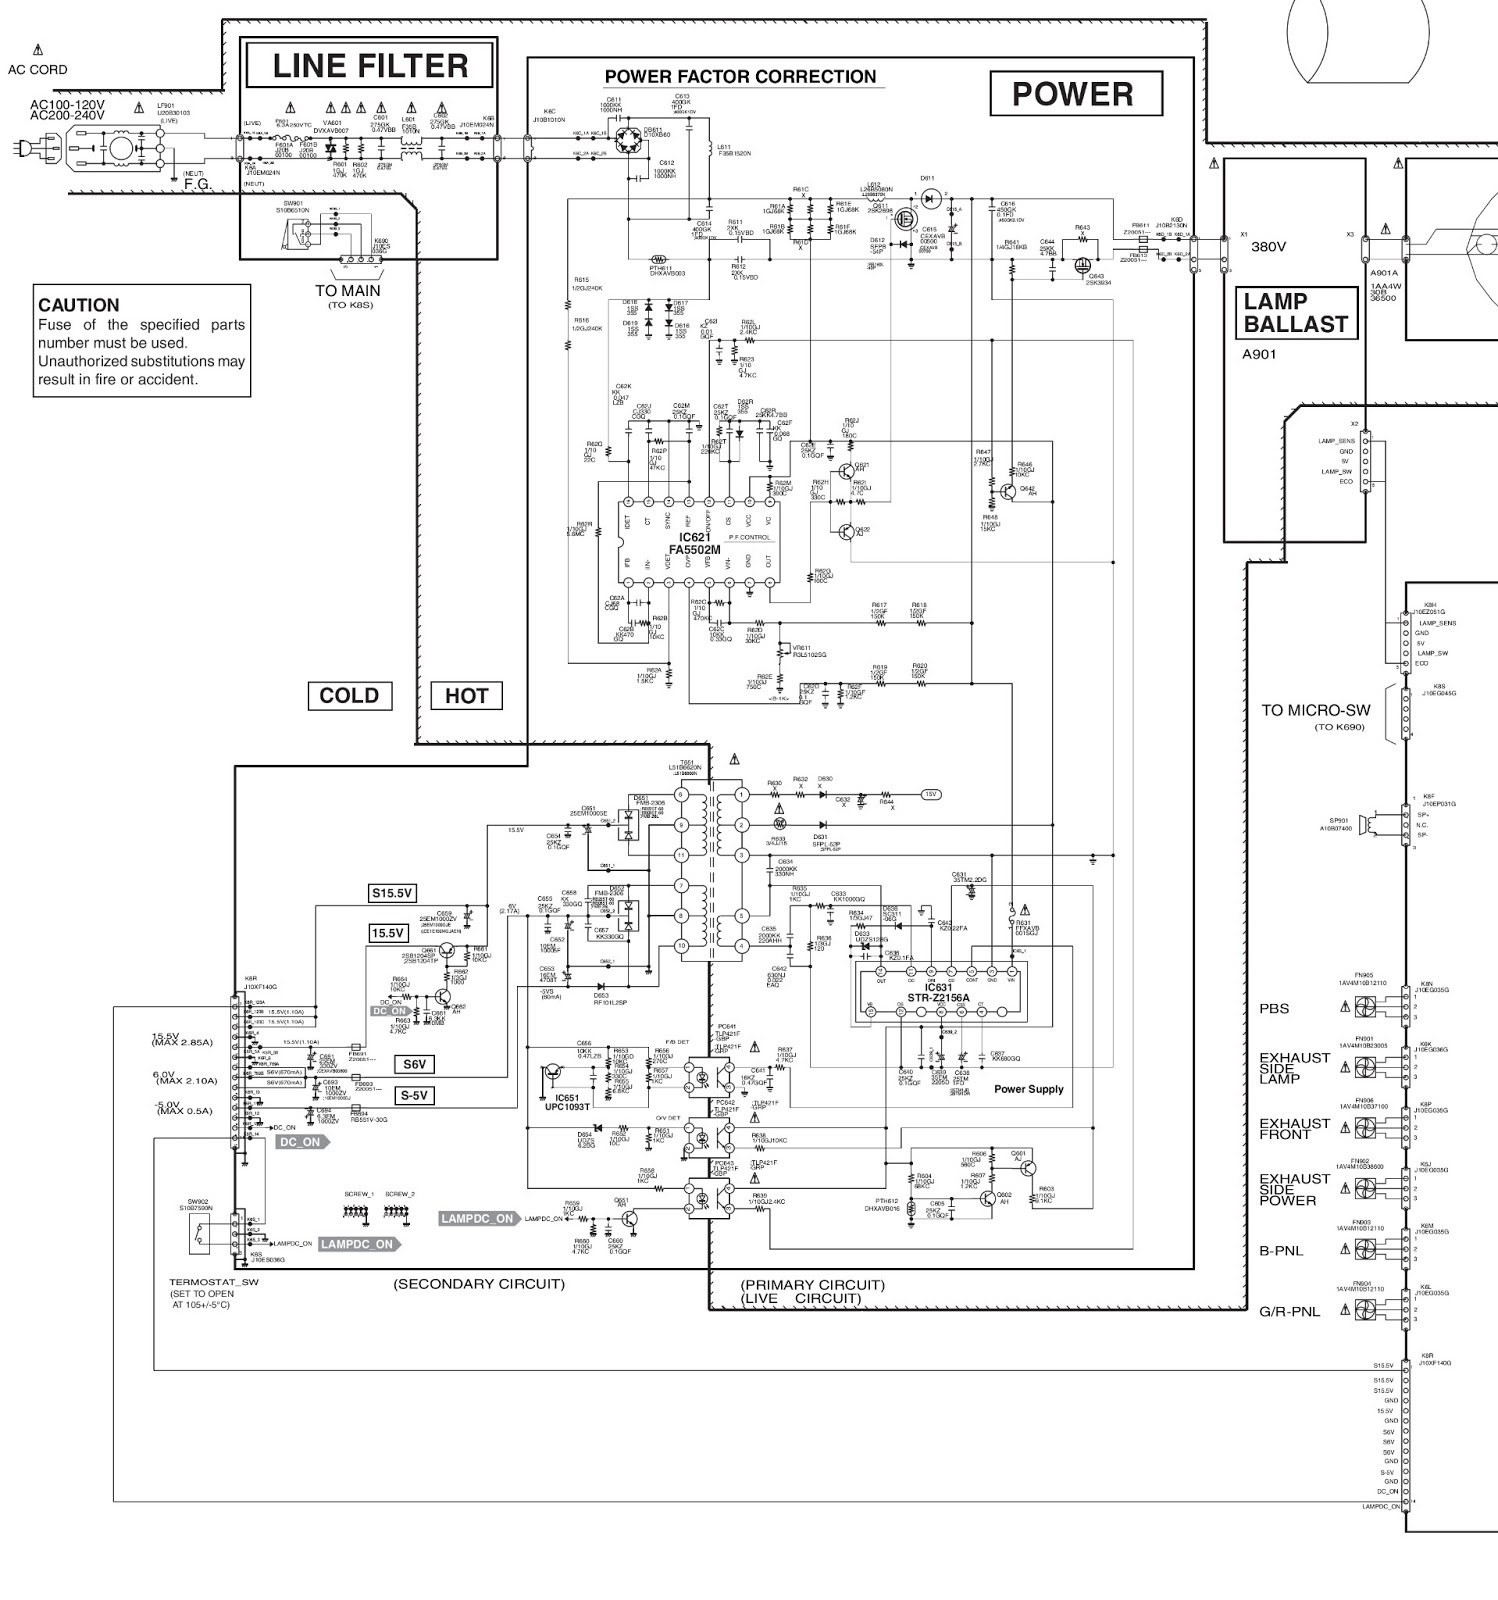 Sanyo Plc Xu87 Projector Power Supply Schematic Diagram Image To Enlarge electrical installation